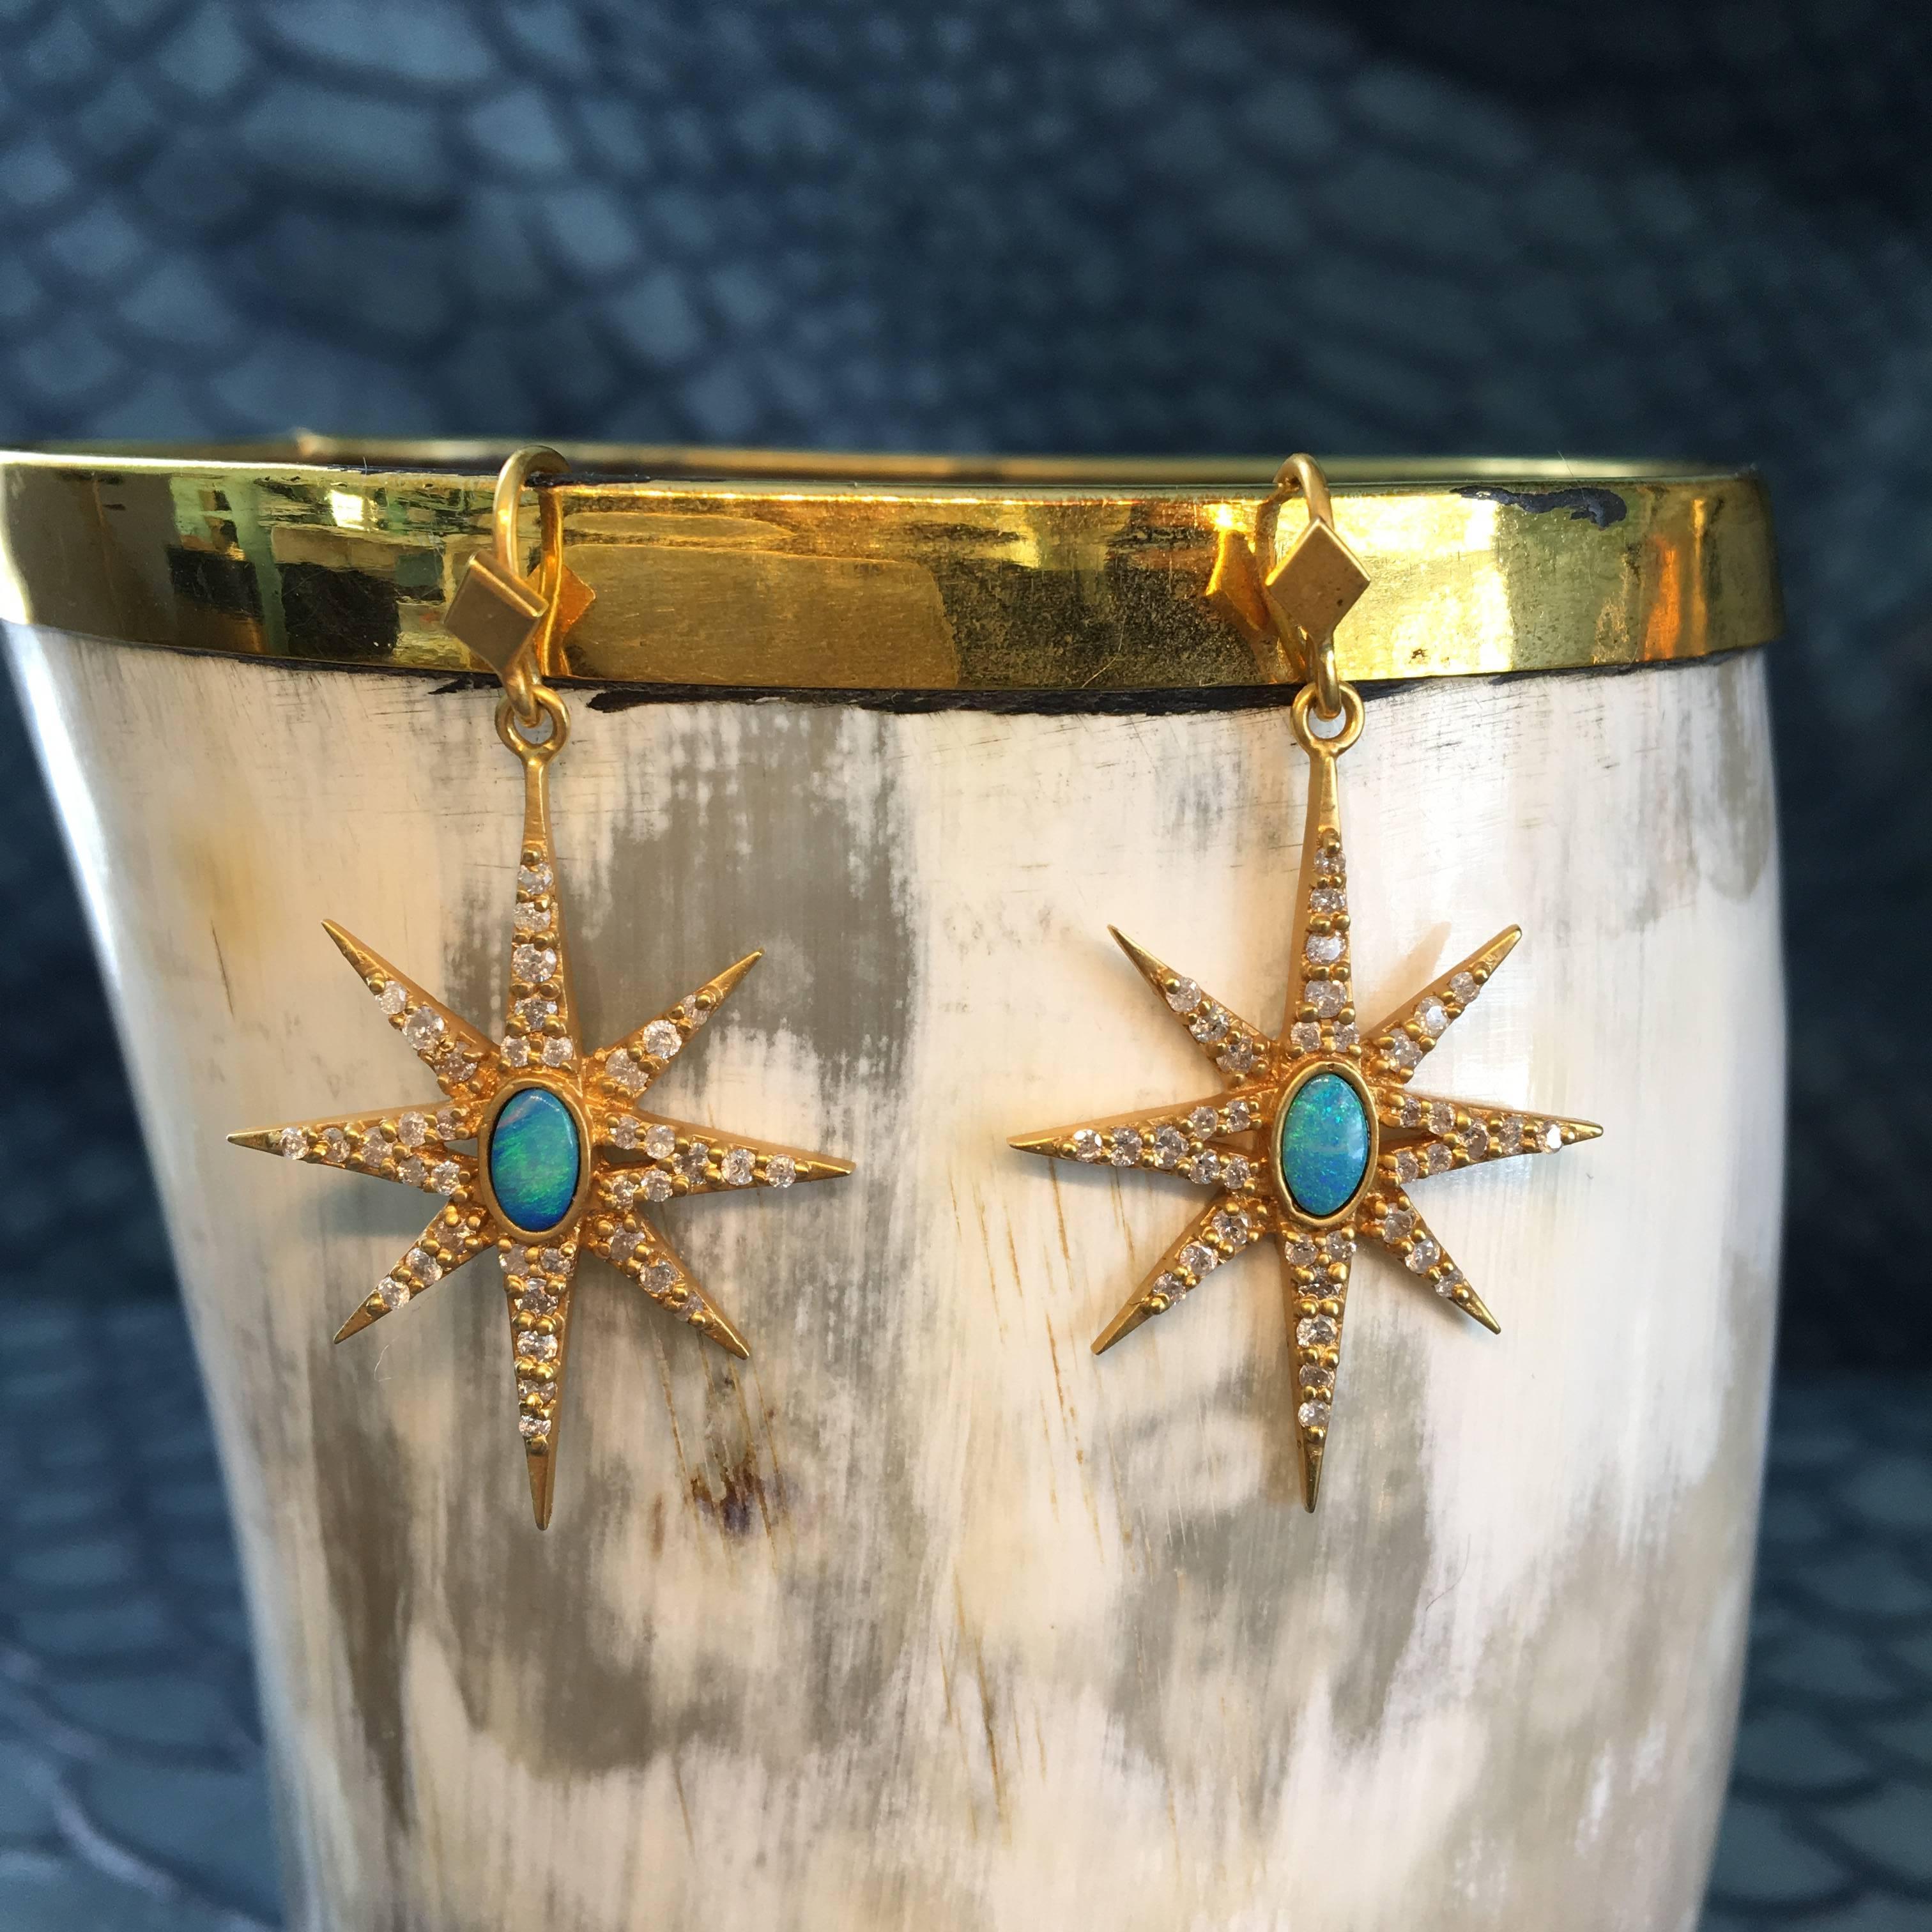 These beautiful star shaped earrings are truly eye catching, with .80 carats of sparkly white diamonds and boulder opals.  Set in Lauren Harper's signature matte 18kt Gold finish, these earrings are perfect for day or night.  Lightweight enough for